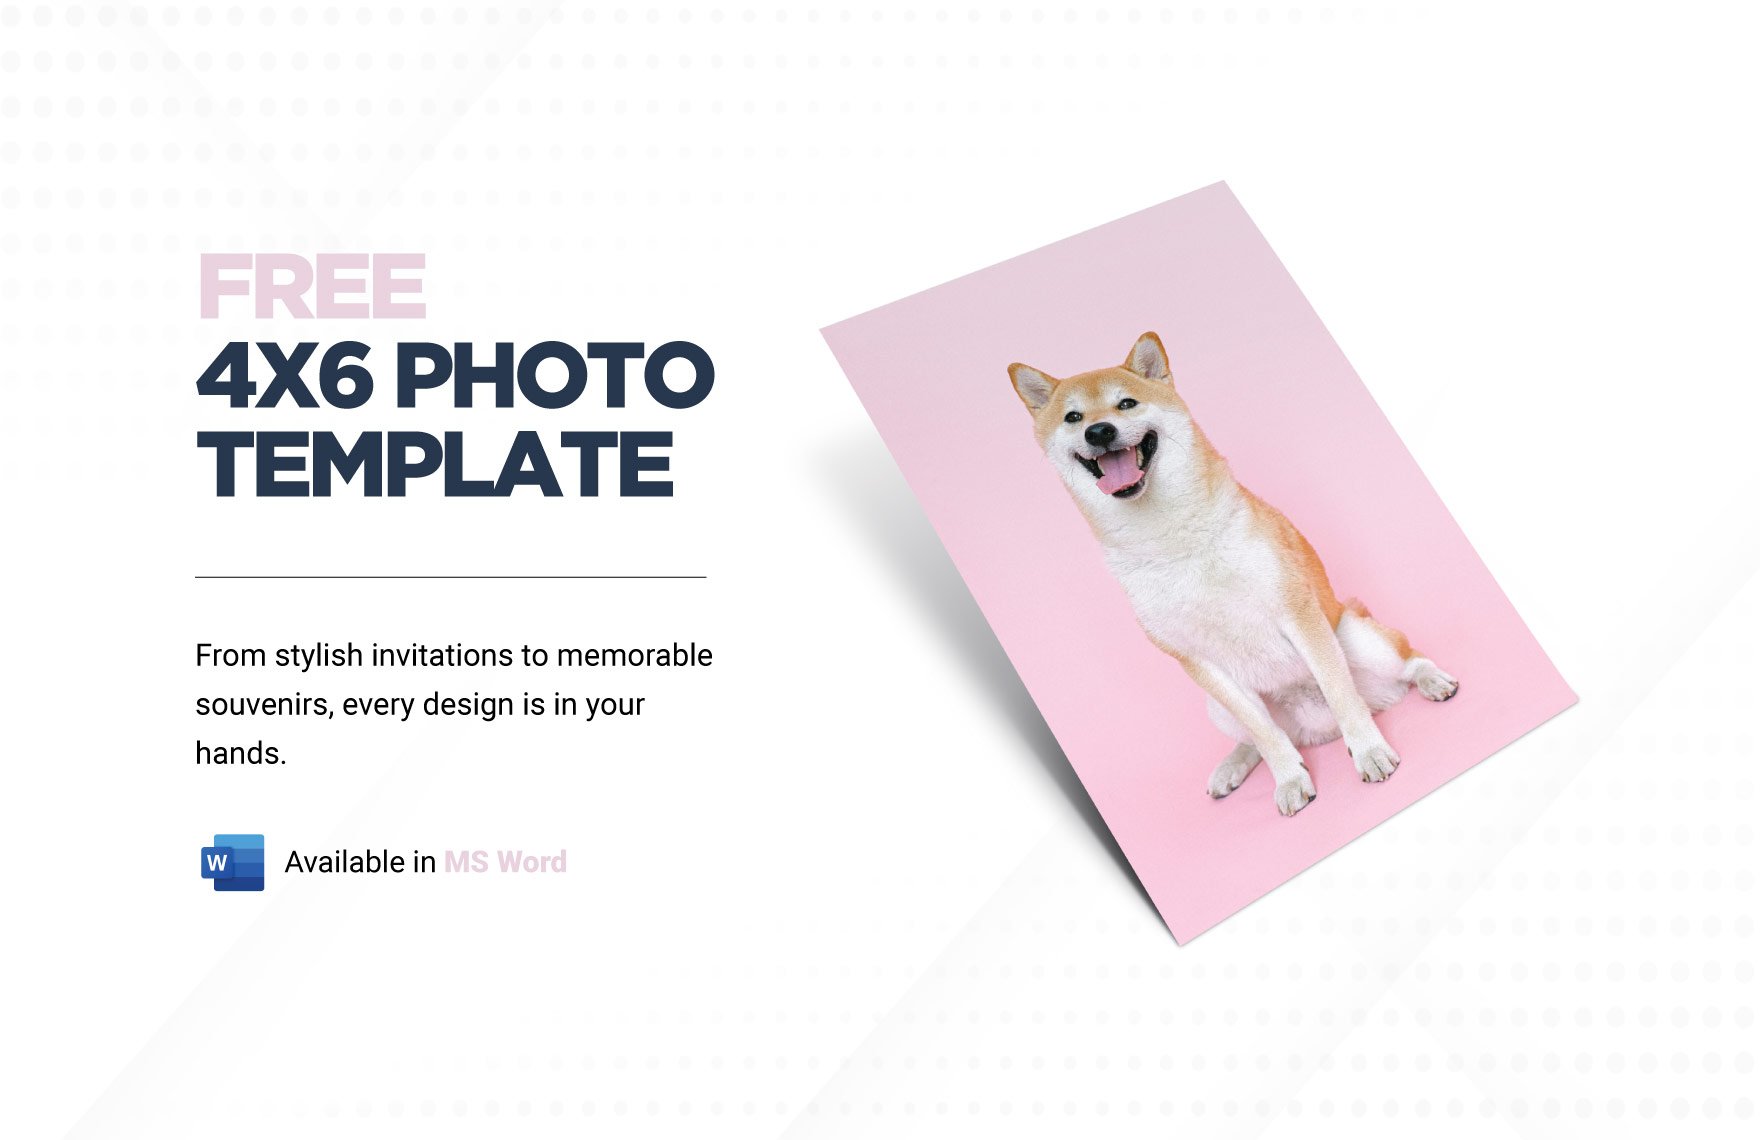 4x6 Photo Template in Word